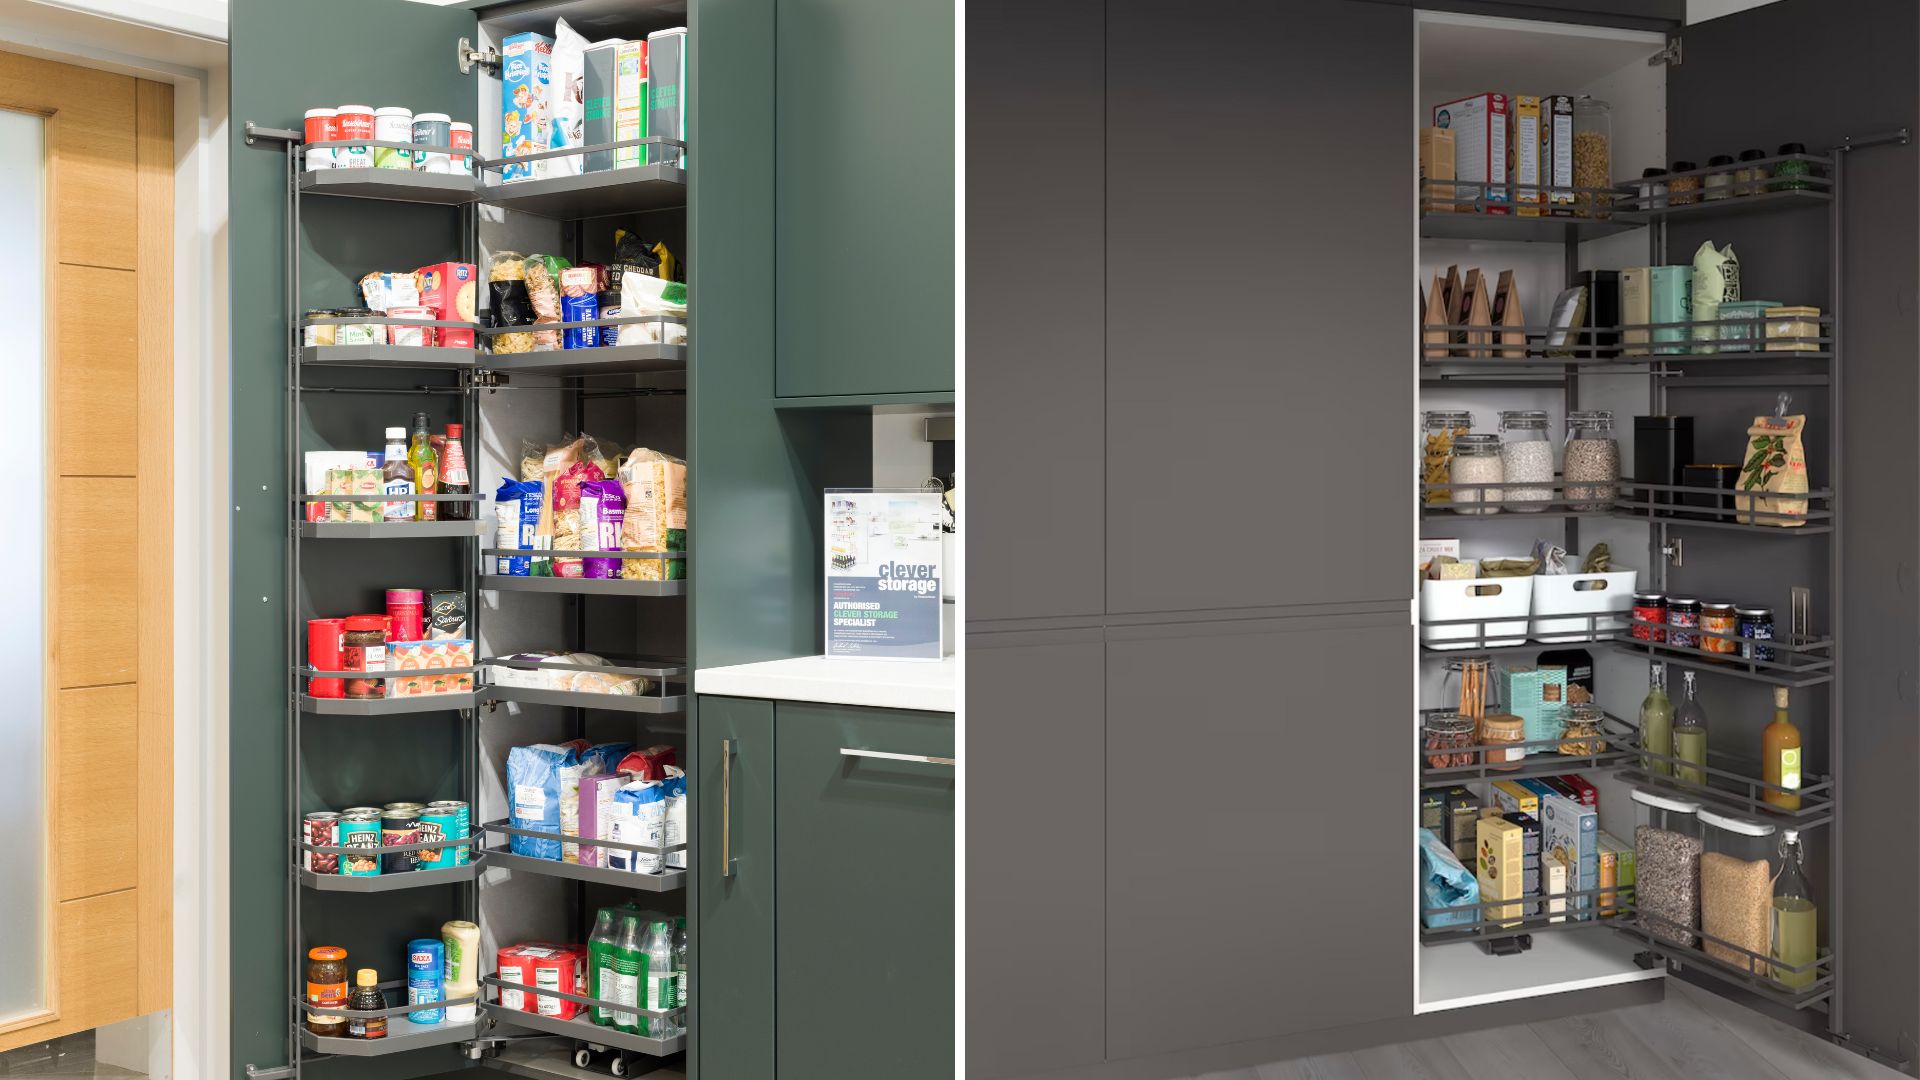 Collage image of two kitchen cabinets with pull-out larder units to show how to organize a pantry